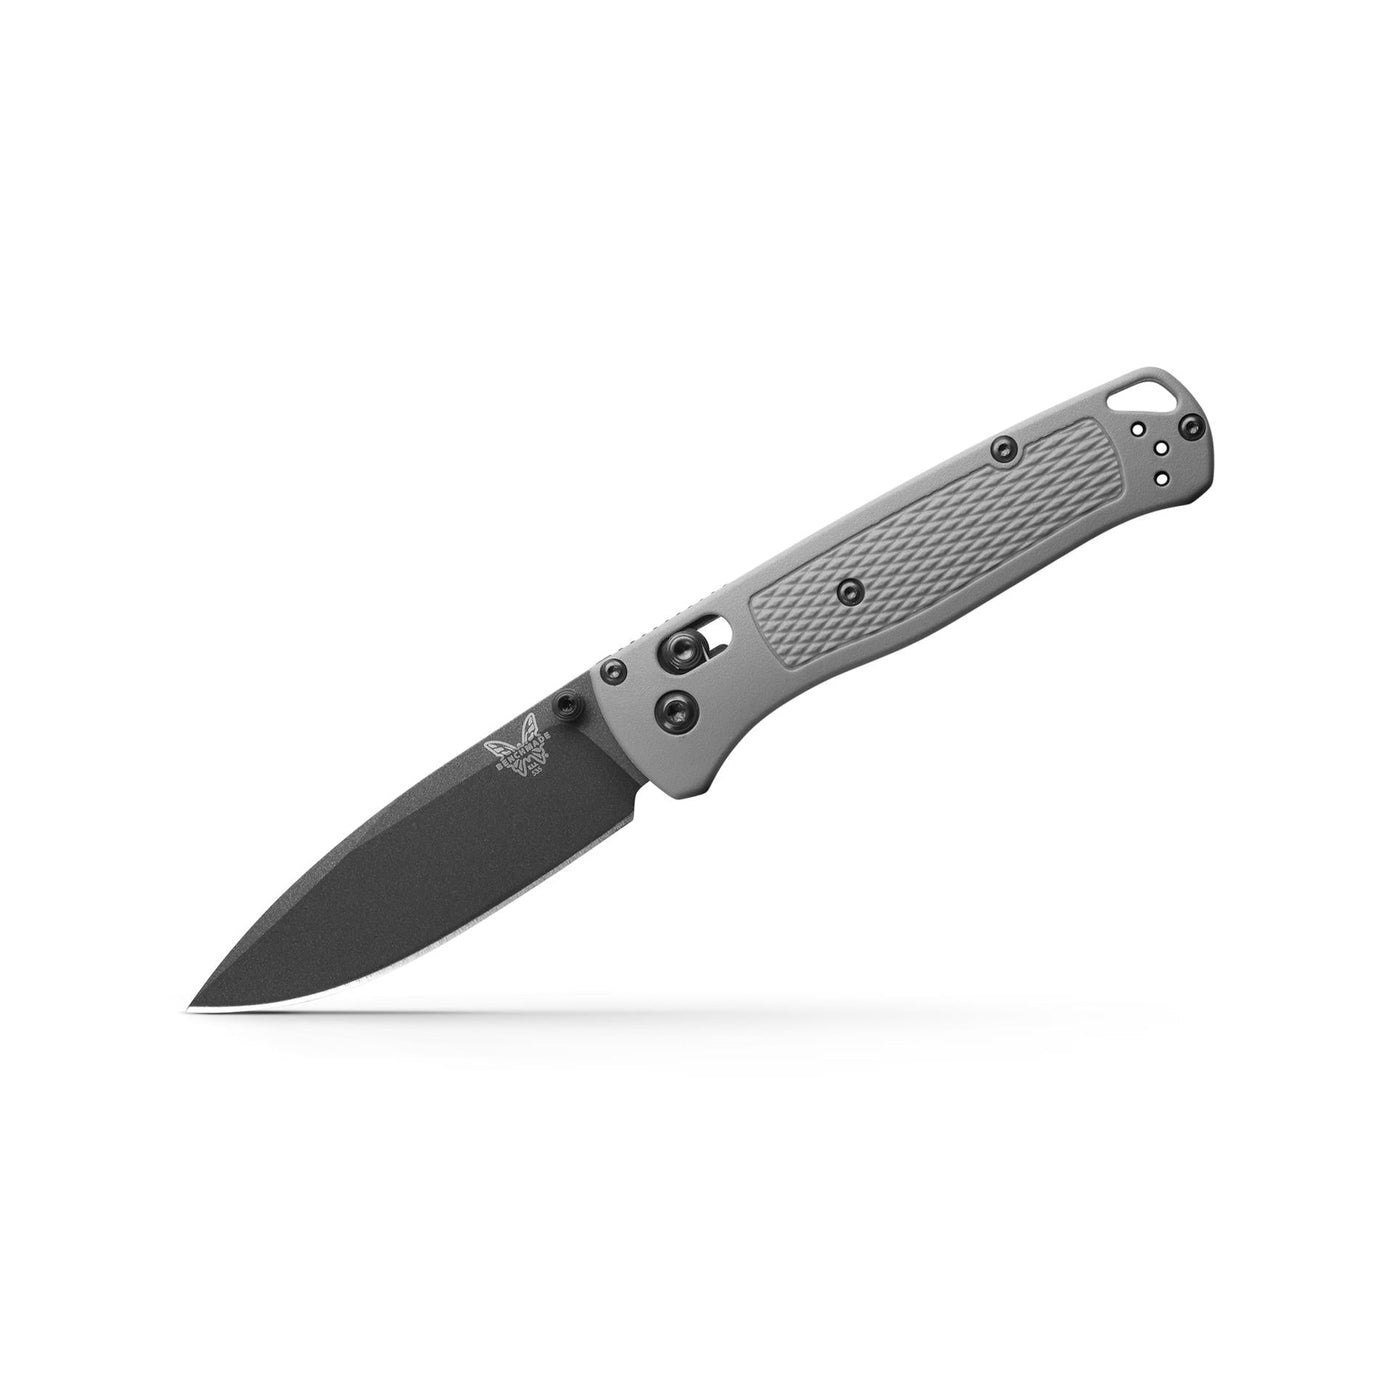 Benchmade Bugout Knife-Knives & Tools-535BK-08-Kevin's Fine Outdoor Gear & Apparel